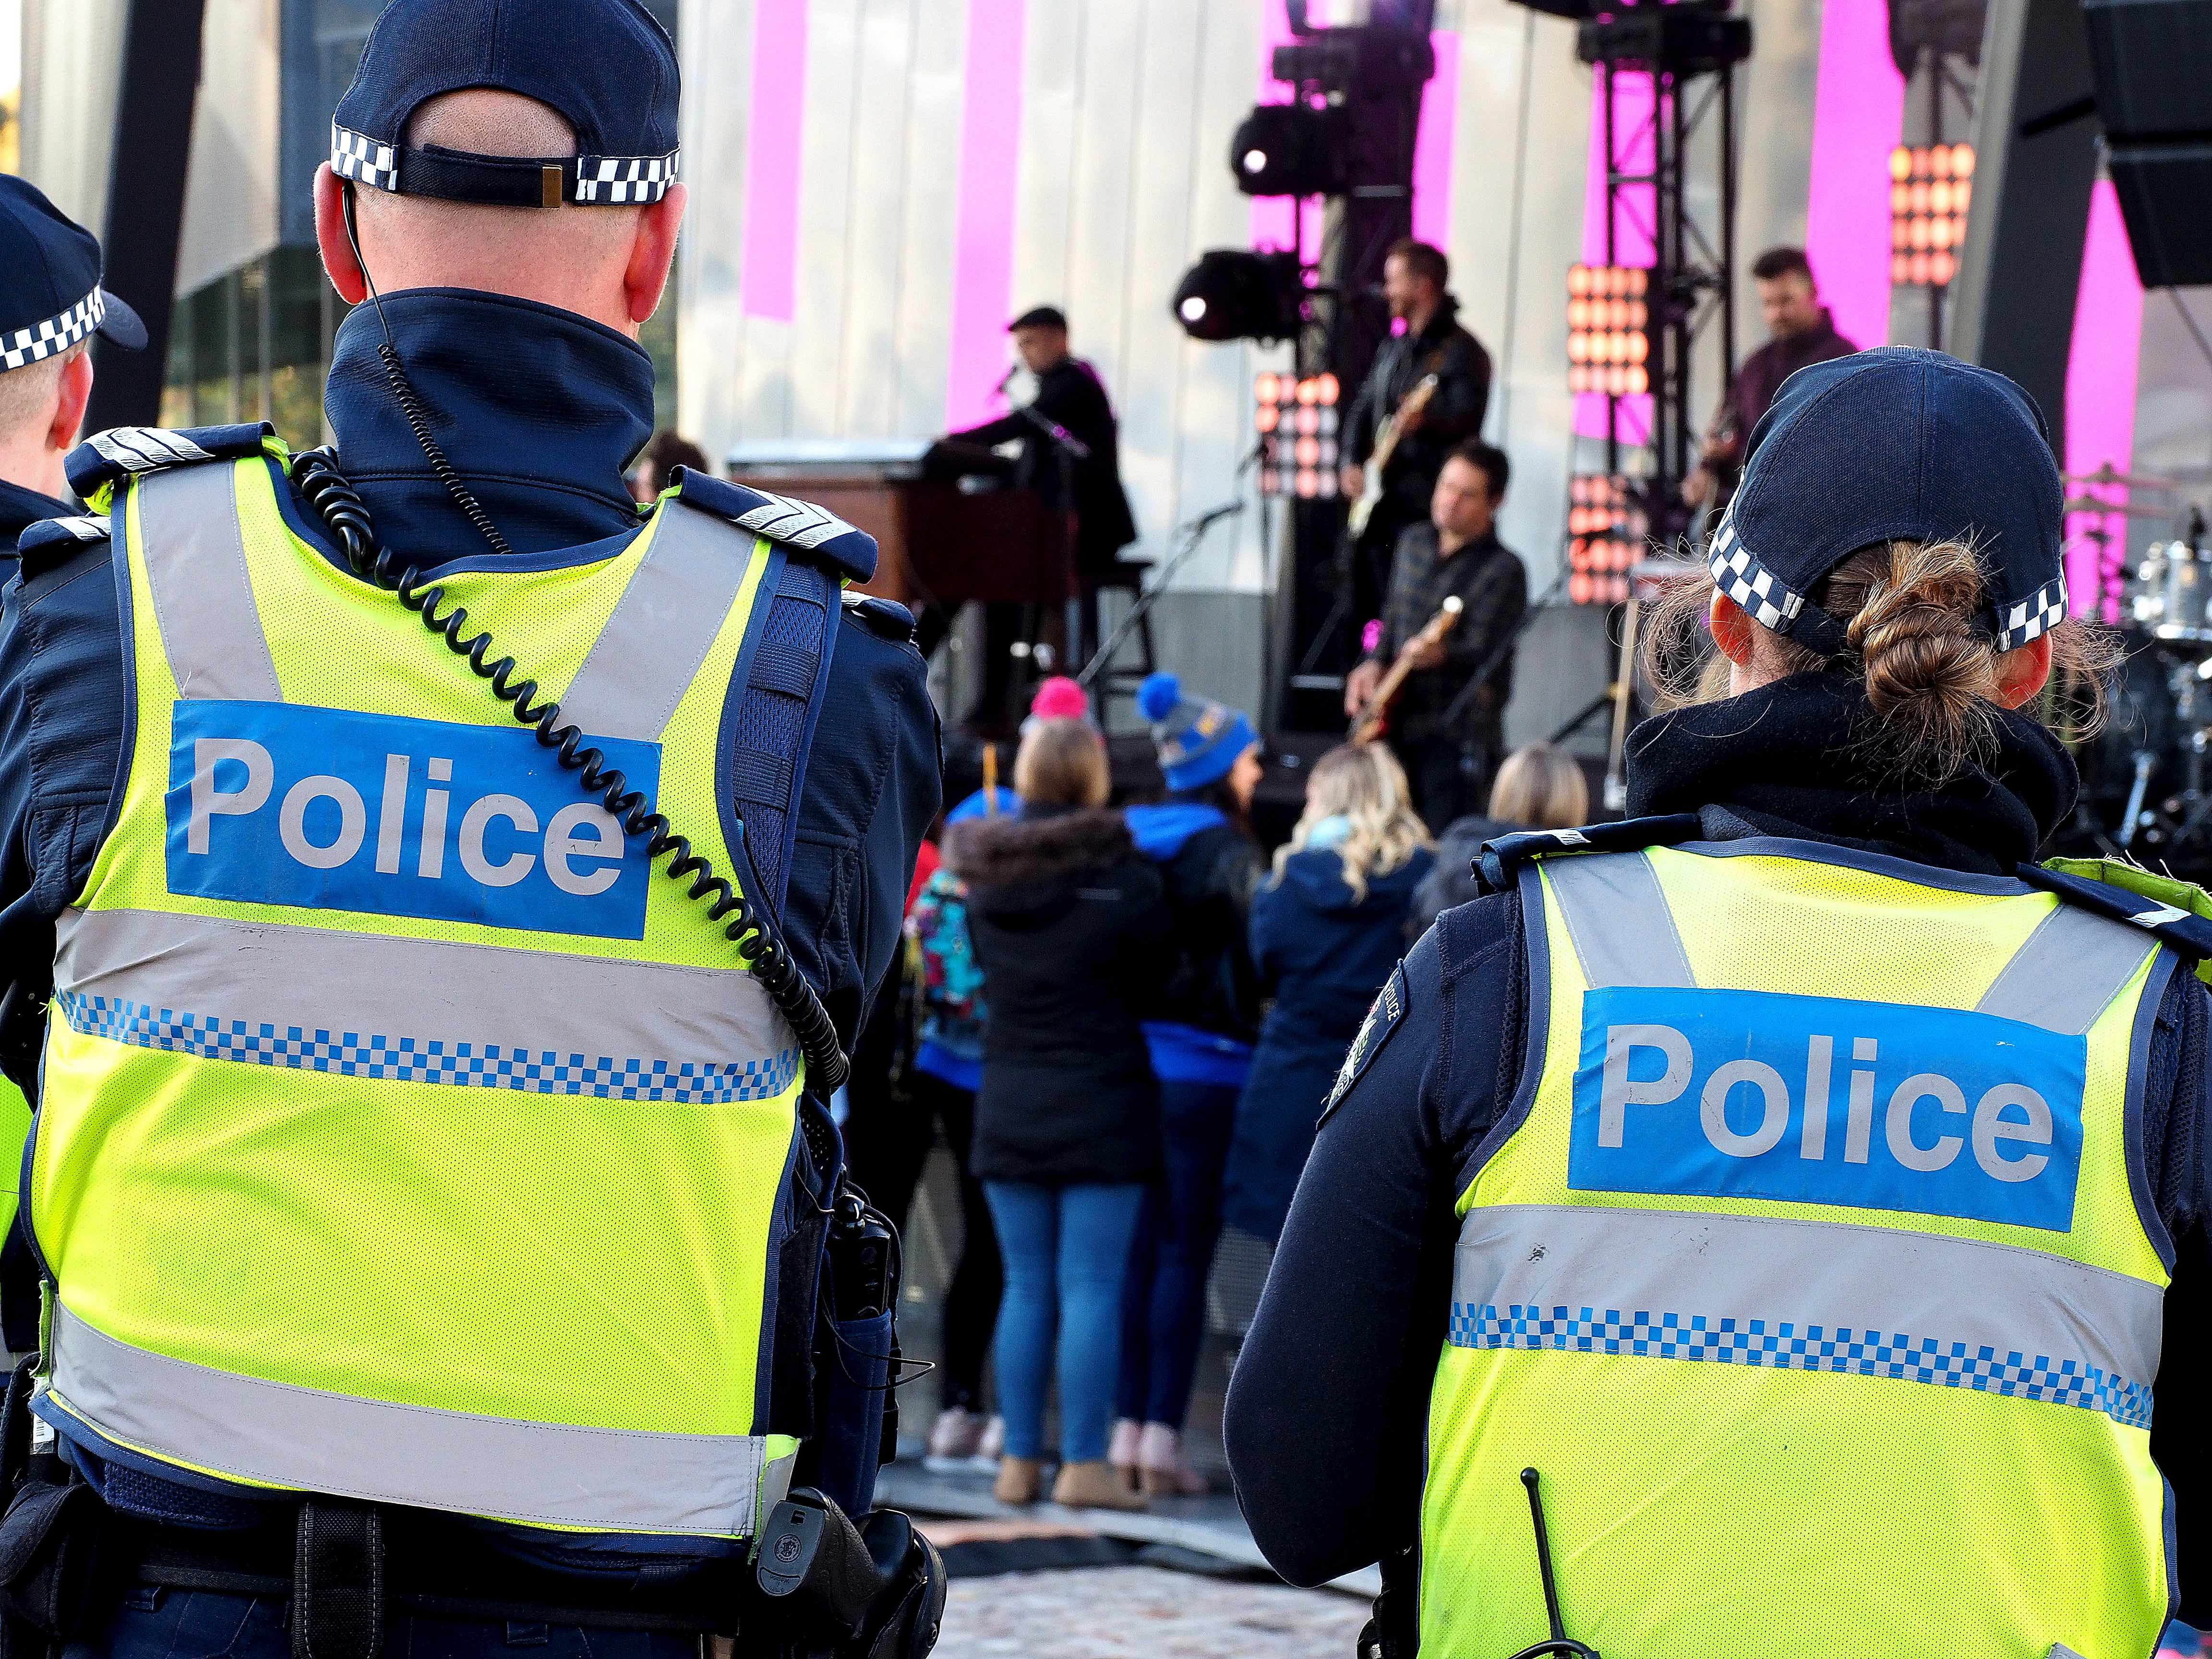 Two police people stand with their arms crossed, wearing yellow vests, observing a music concert.